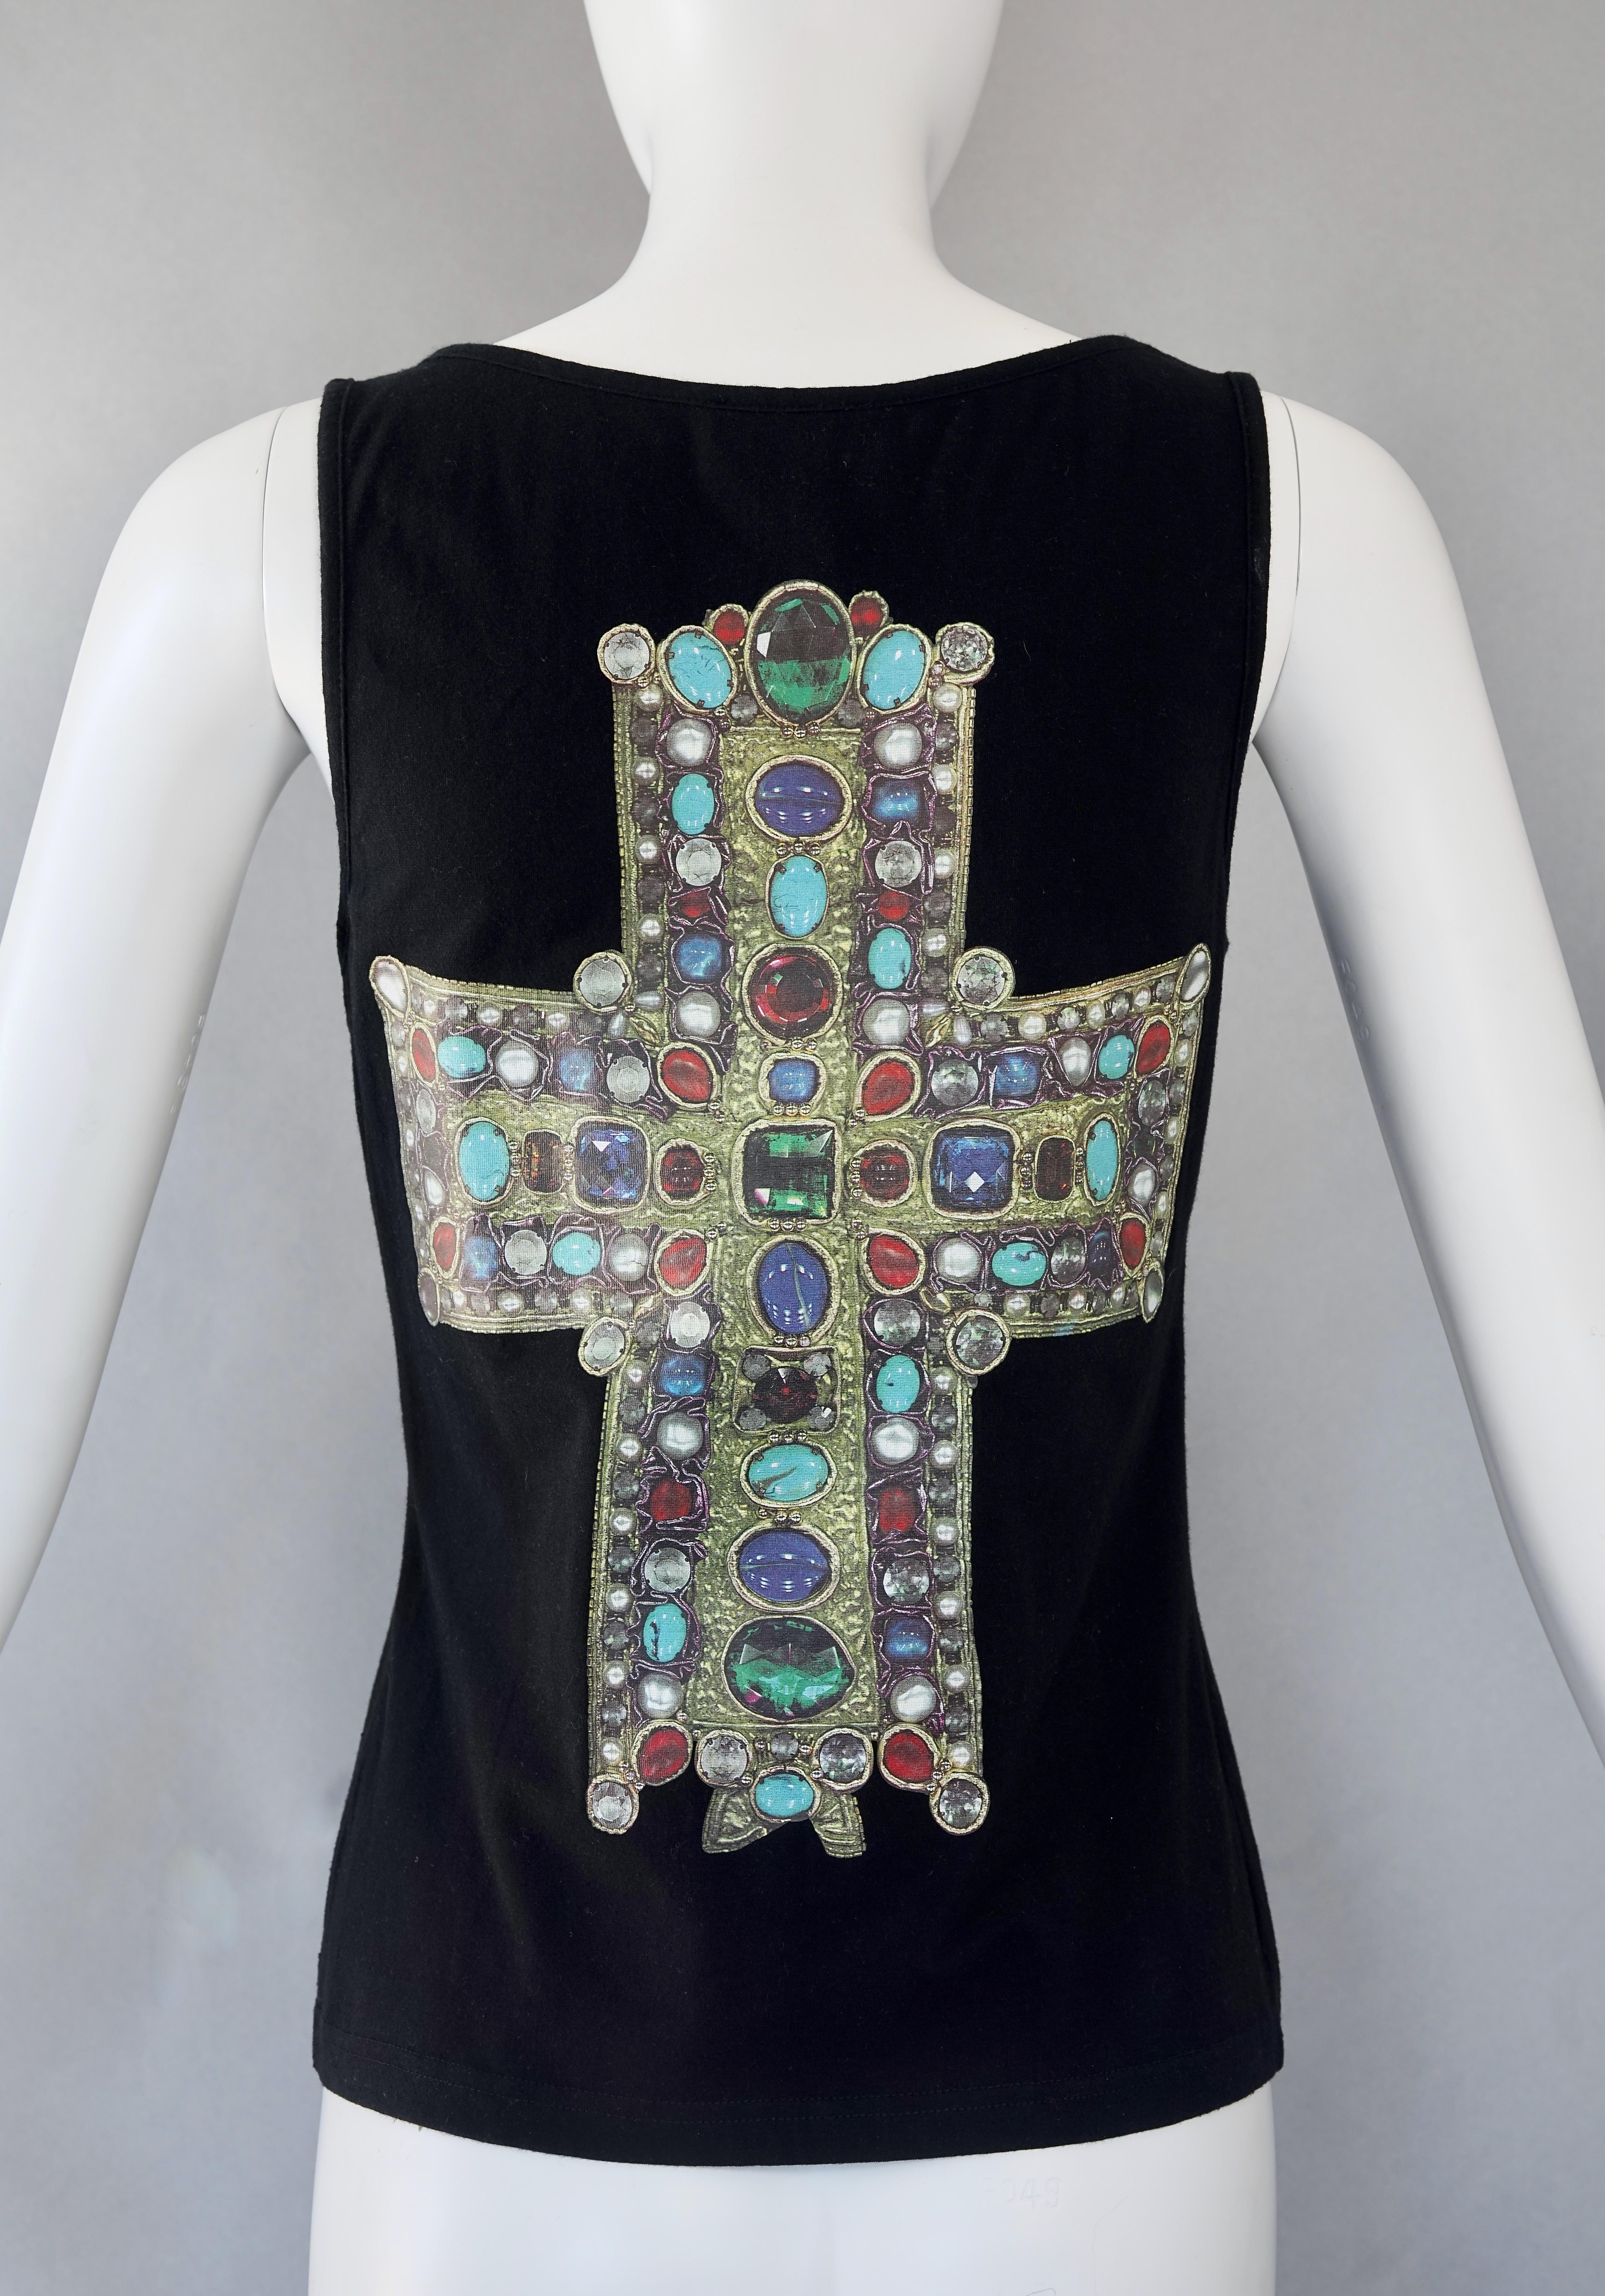 Vintage CHRISTIAN LACROIX Iconic Jewelled Cross Print Tank Top For Sale 1